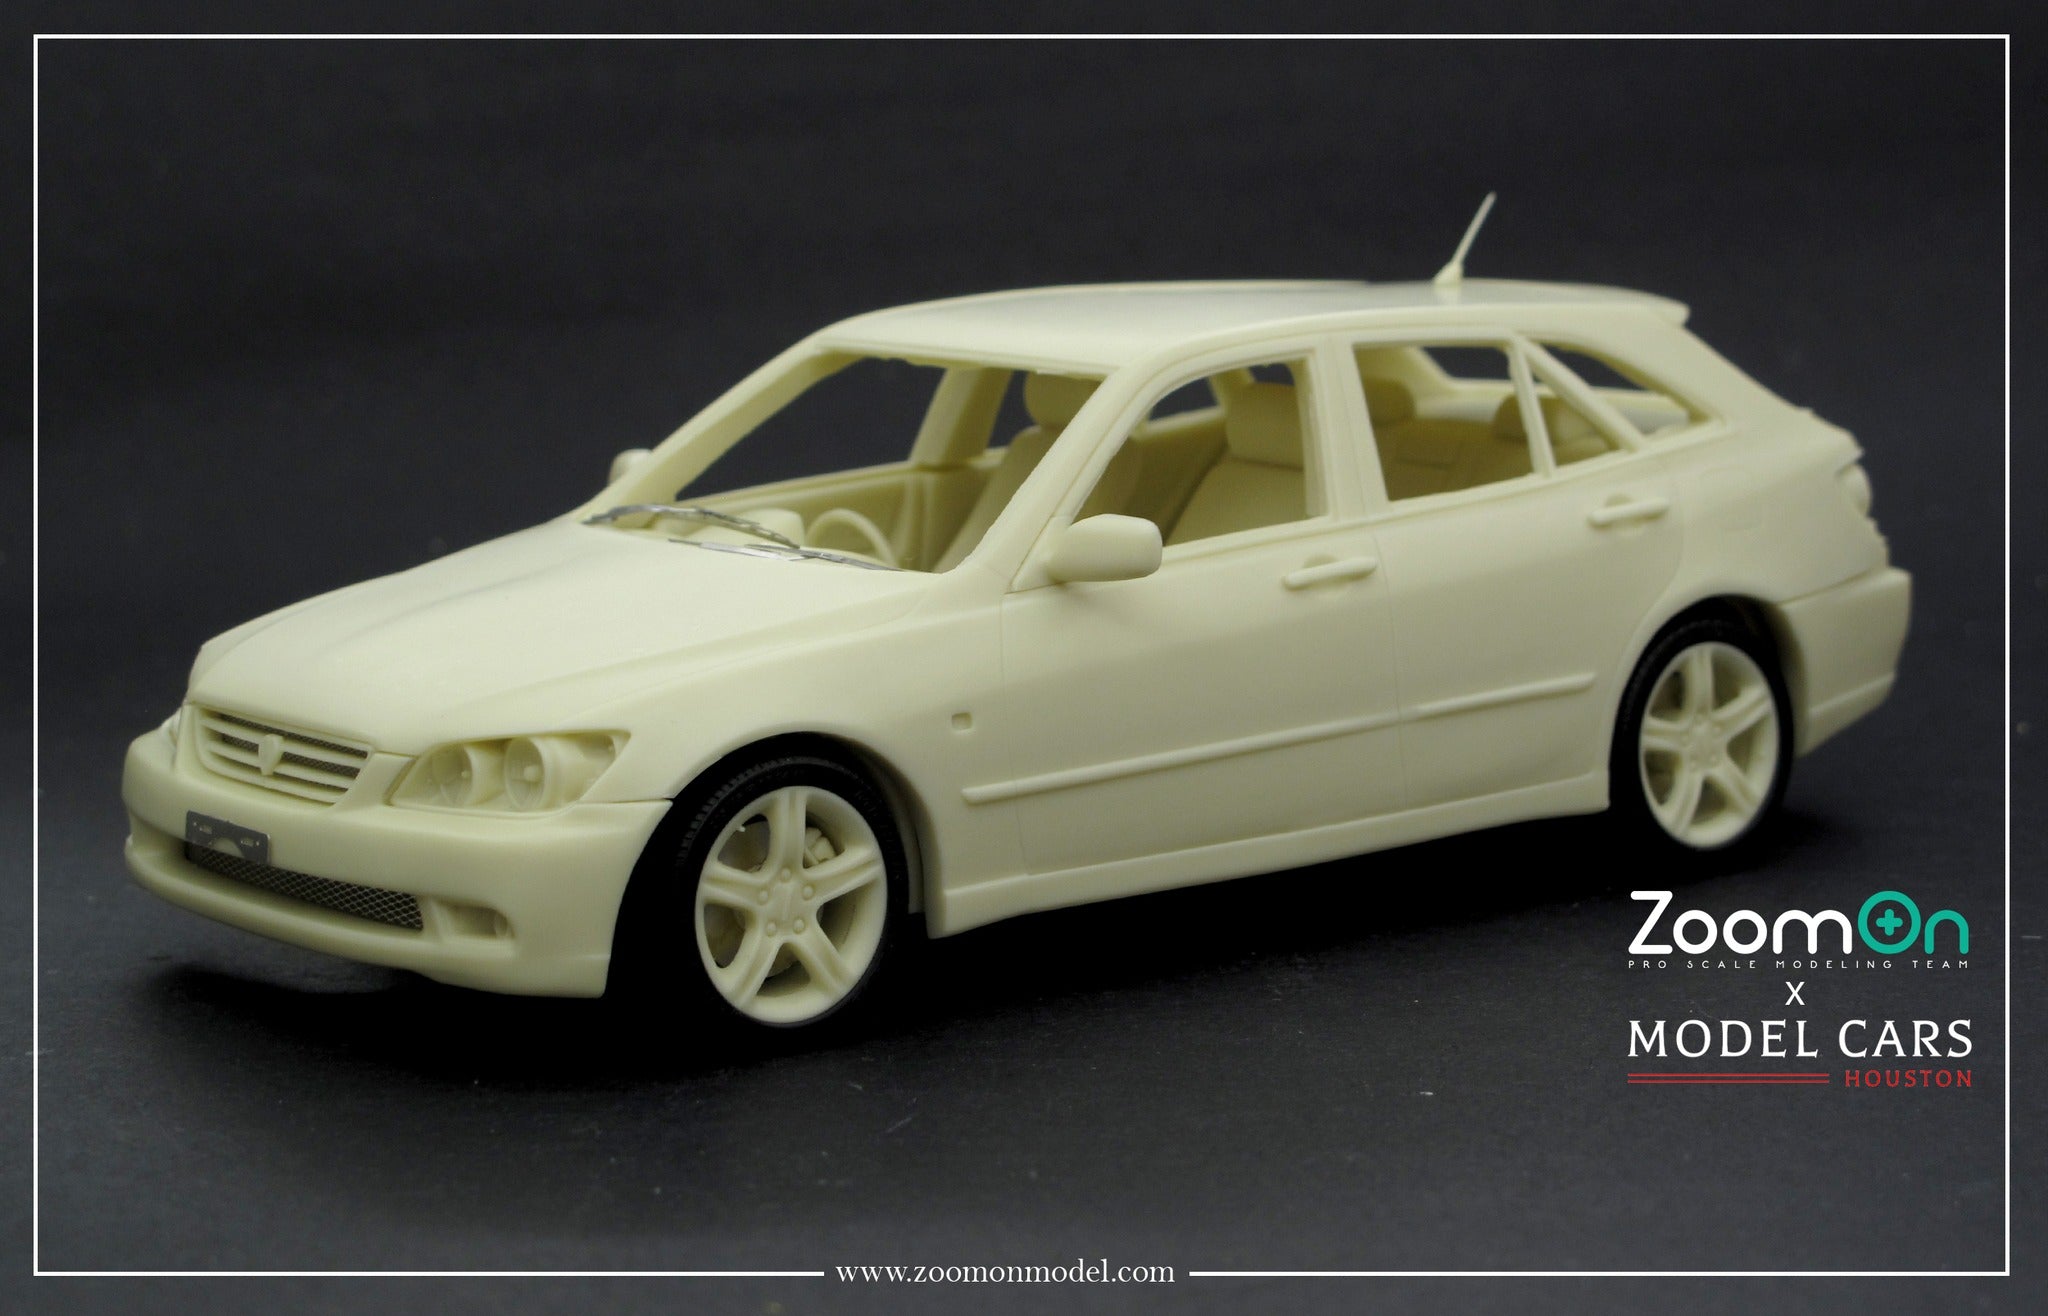 Shop by Scale - 1:24 Scale Diecast Cars - Page 1 